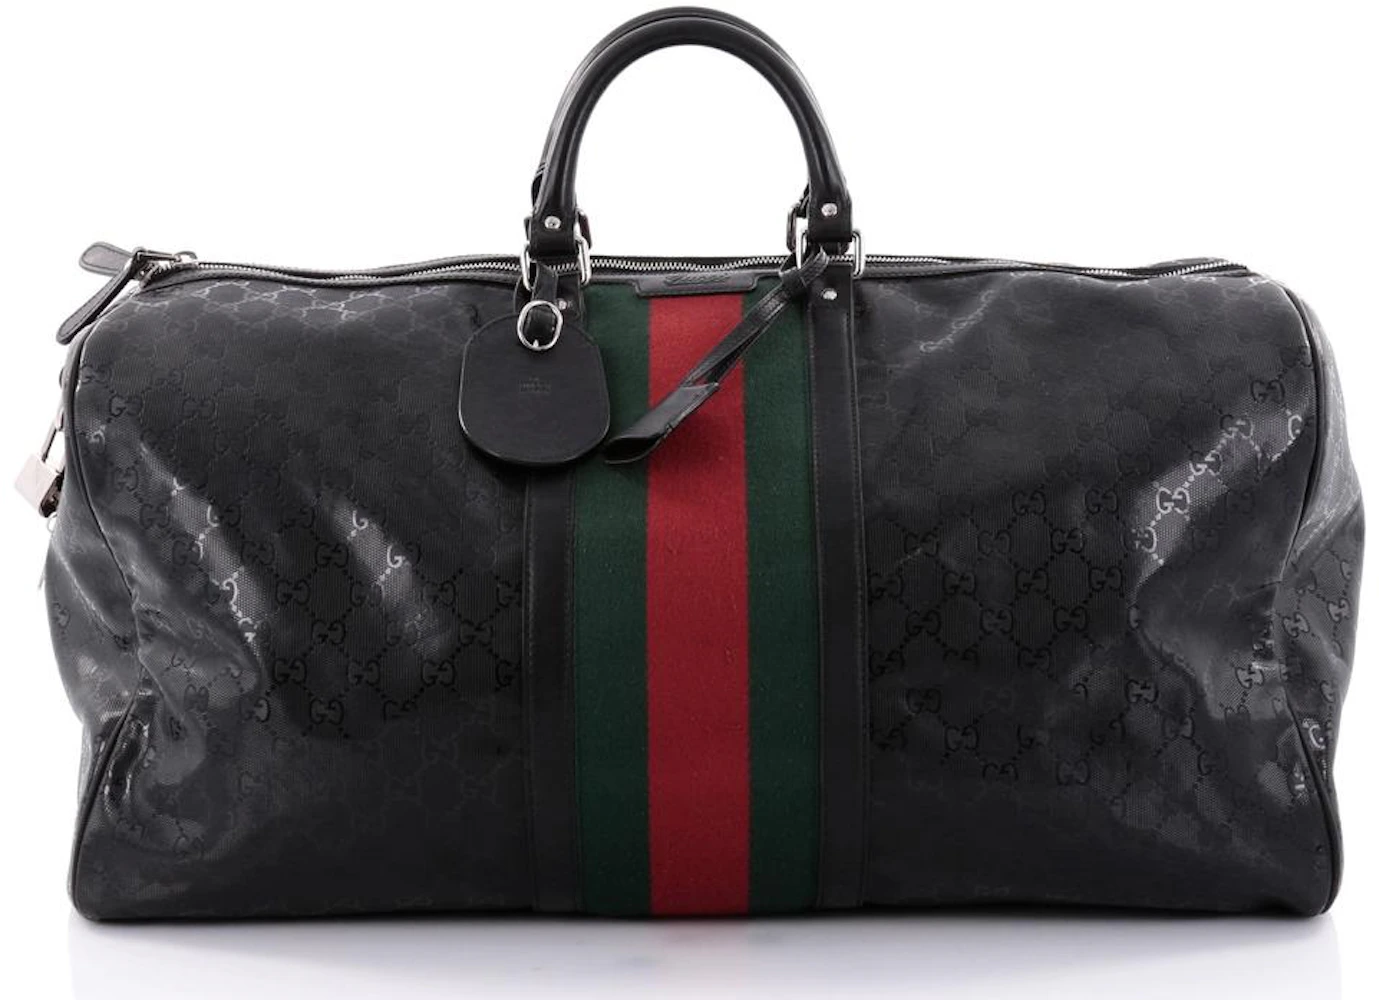 GUCCI GG BLACK LEATHER Zip Convertable DUFFLE Weekend TRAVEL